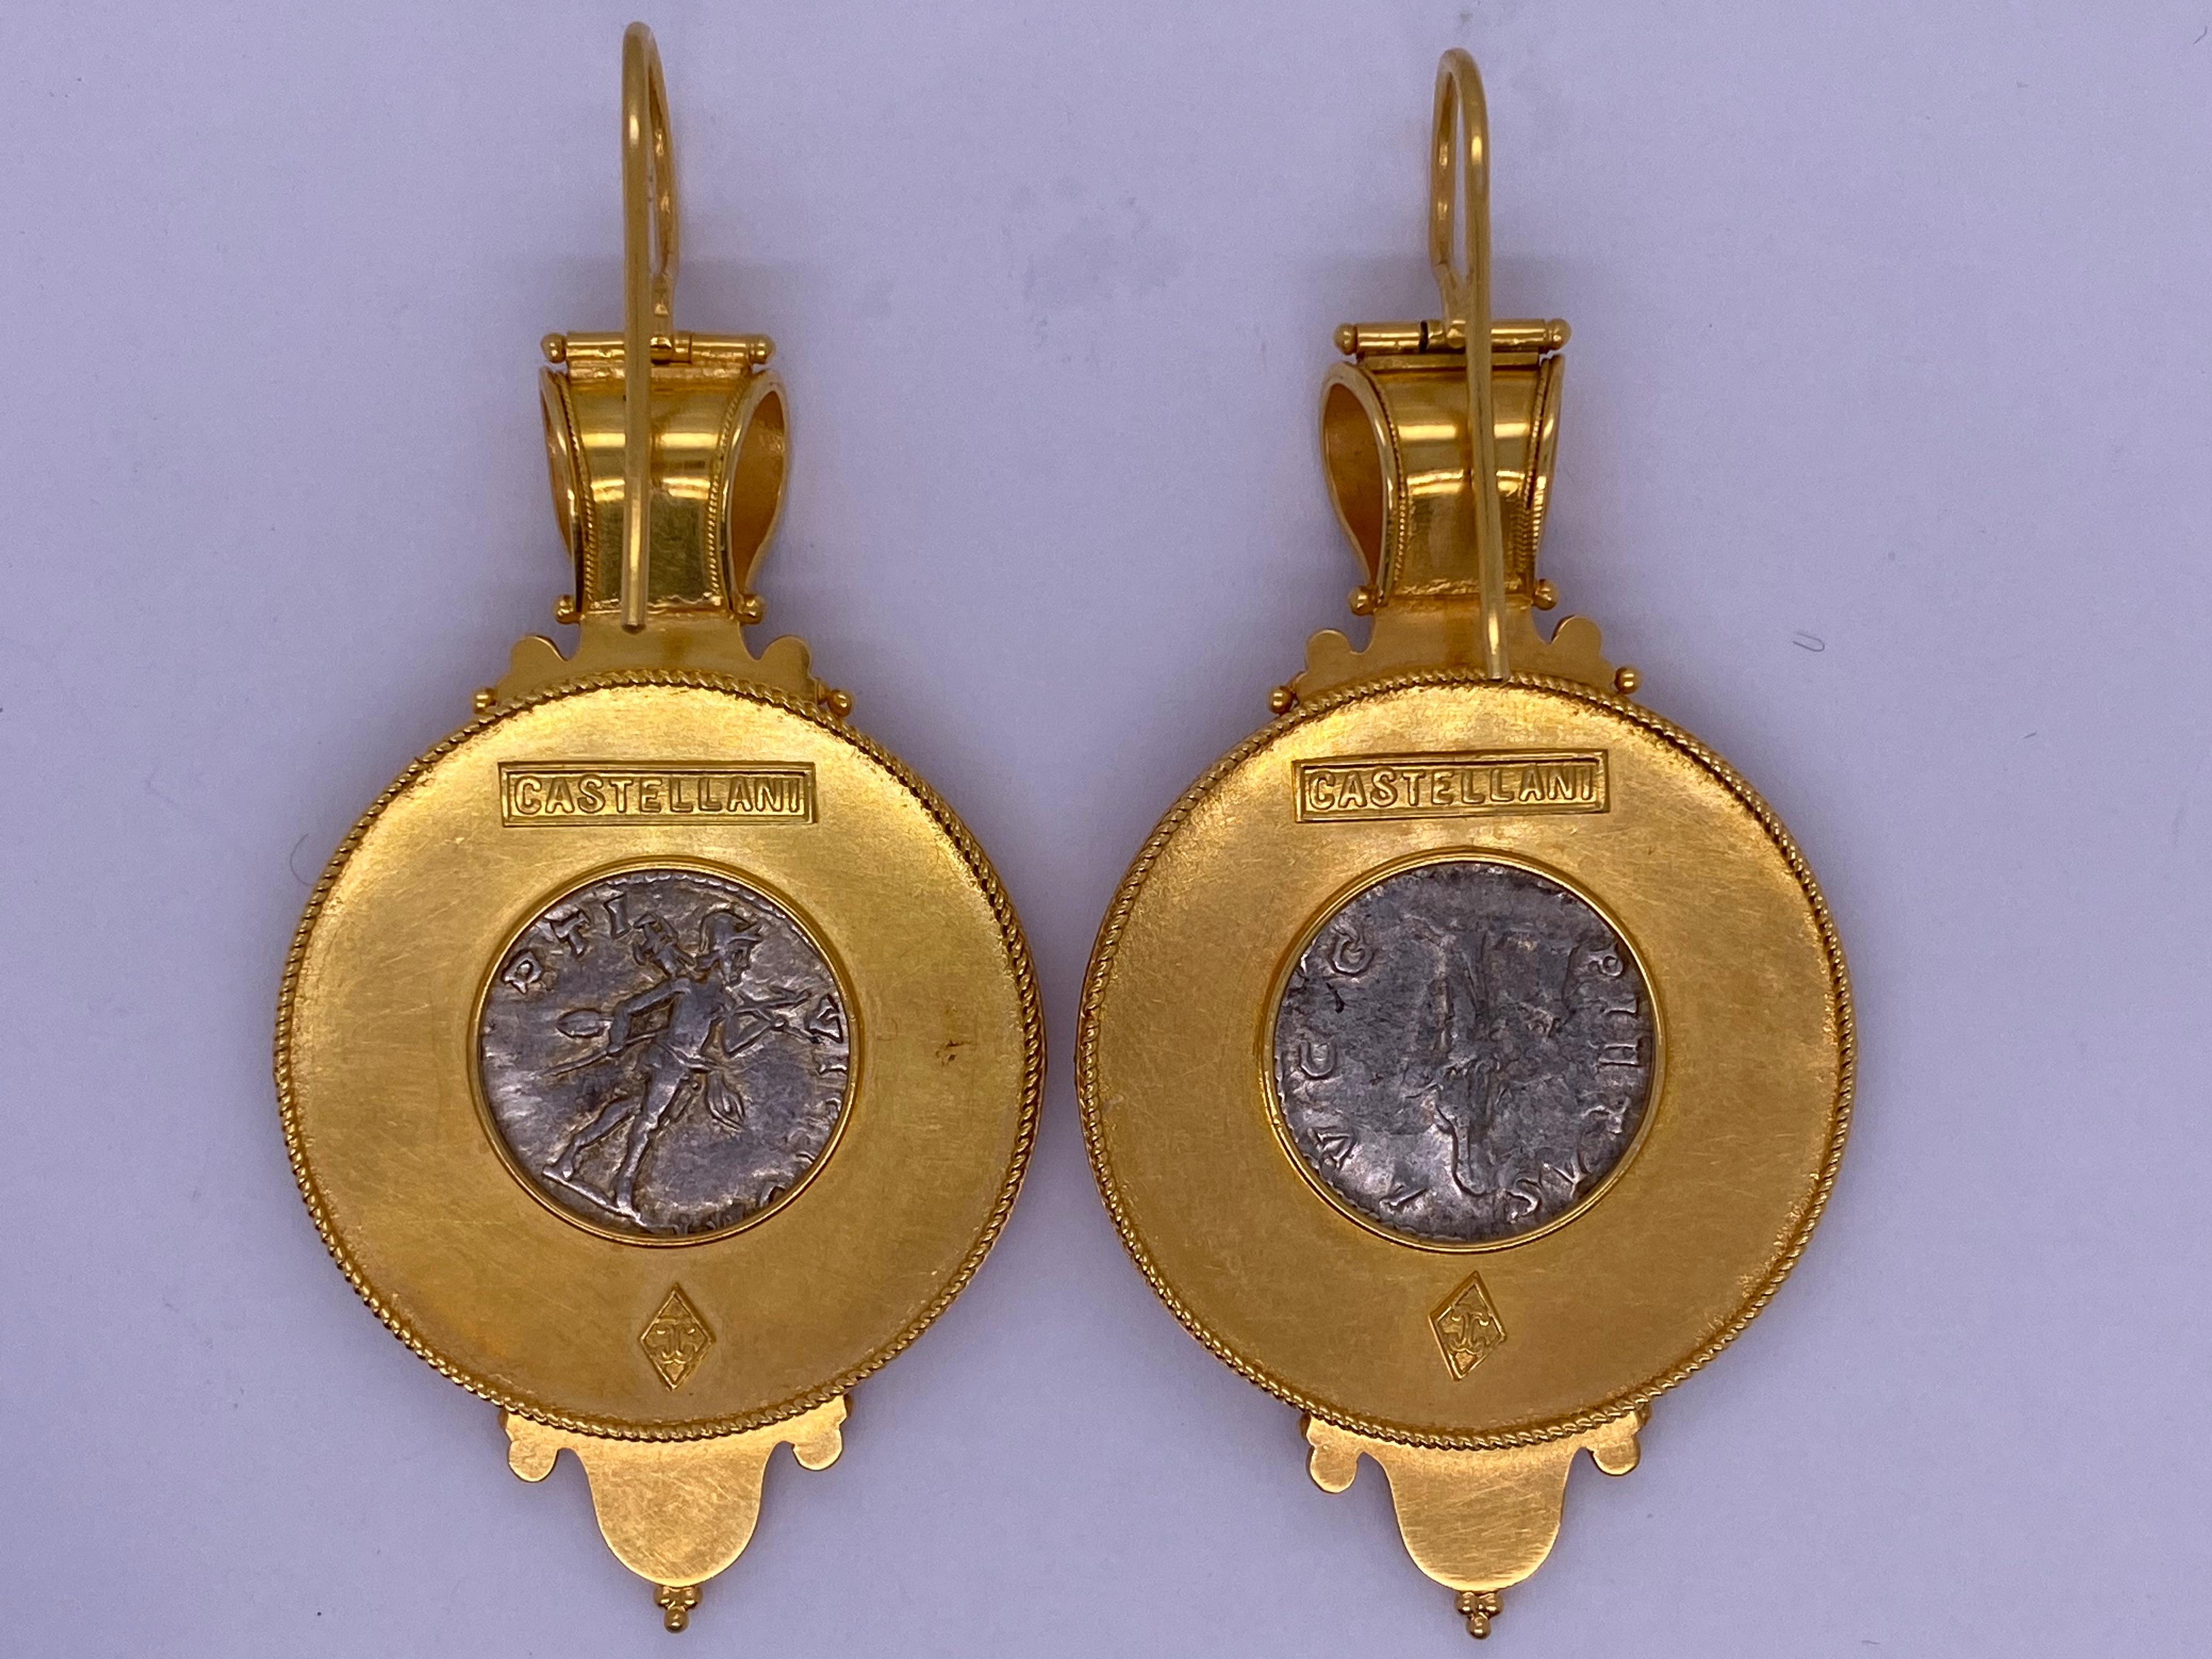 Castellani Ancient Silver Greek Coins circa 300BCE 15kt Gold Bulla Earrings  For Sale 3